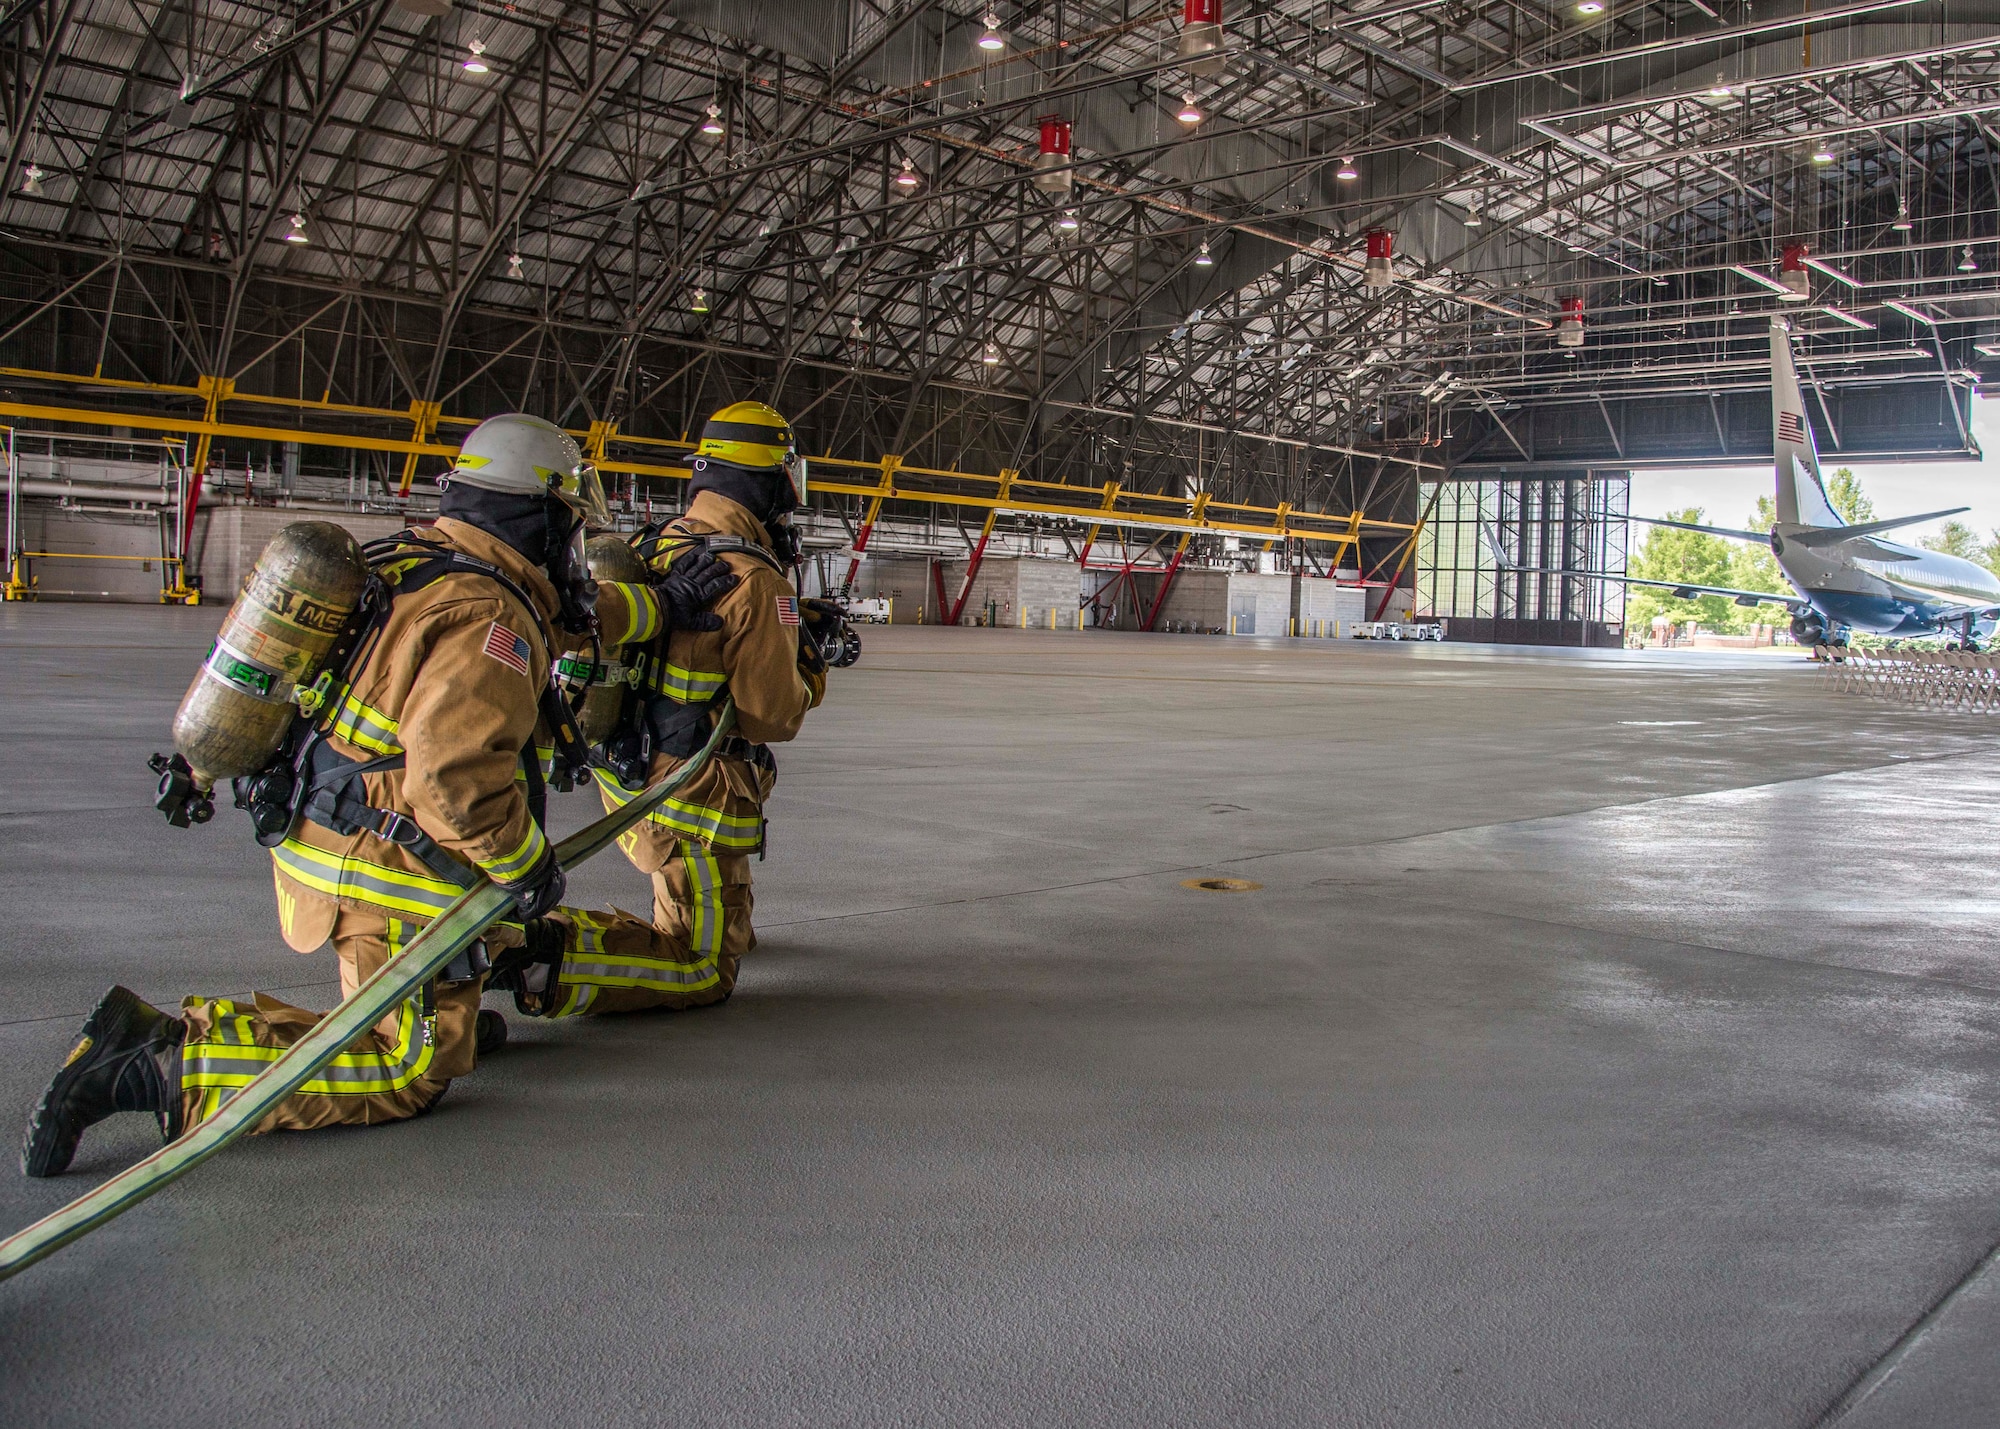 William Johnson, 375th Civil Engineer Squadron station cheif, and Airman 1st Class Macario Martinez, 375th CES fire fighter, simulate putting out a fire on the flight line during a training exercise at Scott Air Force Base, Ill. on June 22, 2017.The exercise was part of the unit's Airport Rescue and Fire Fighting's training which tests their ability to arrive on scene, fight fires, and provide a rescue path as well as recover or rescue personnel. (U.S. Air Force photo by Airman 1st Class Daniel Garcia)